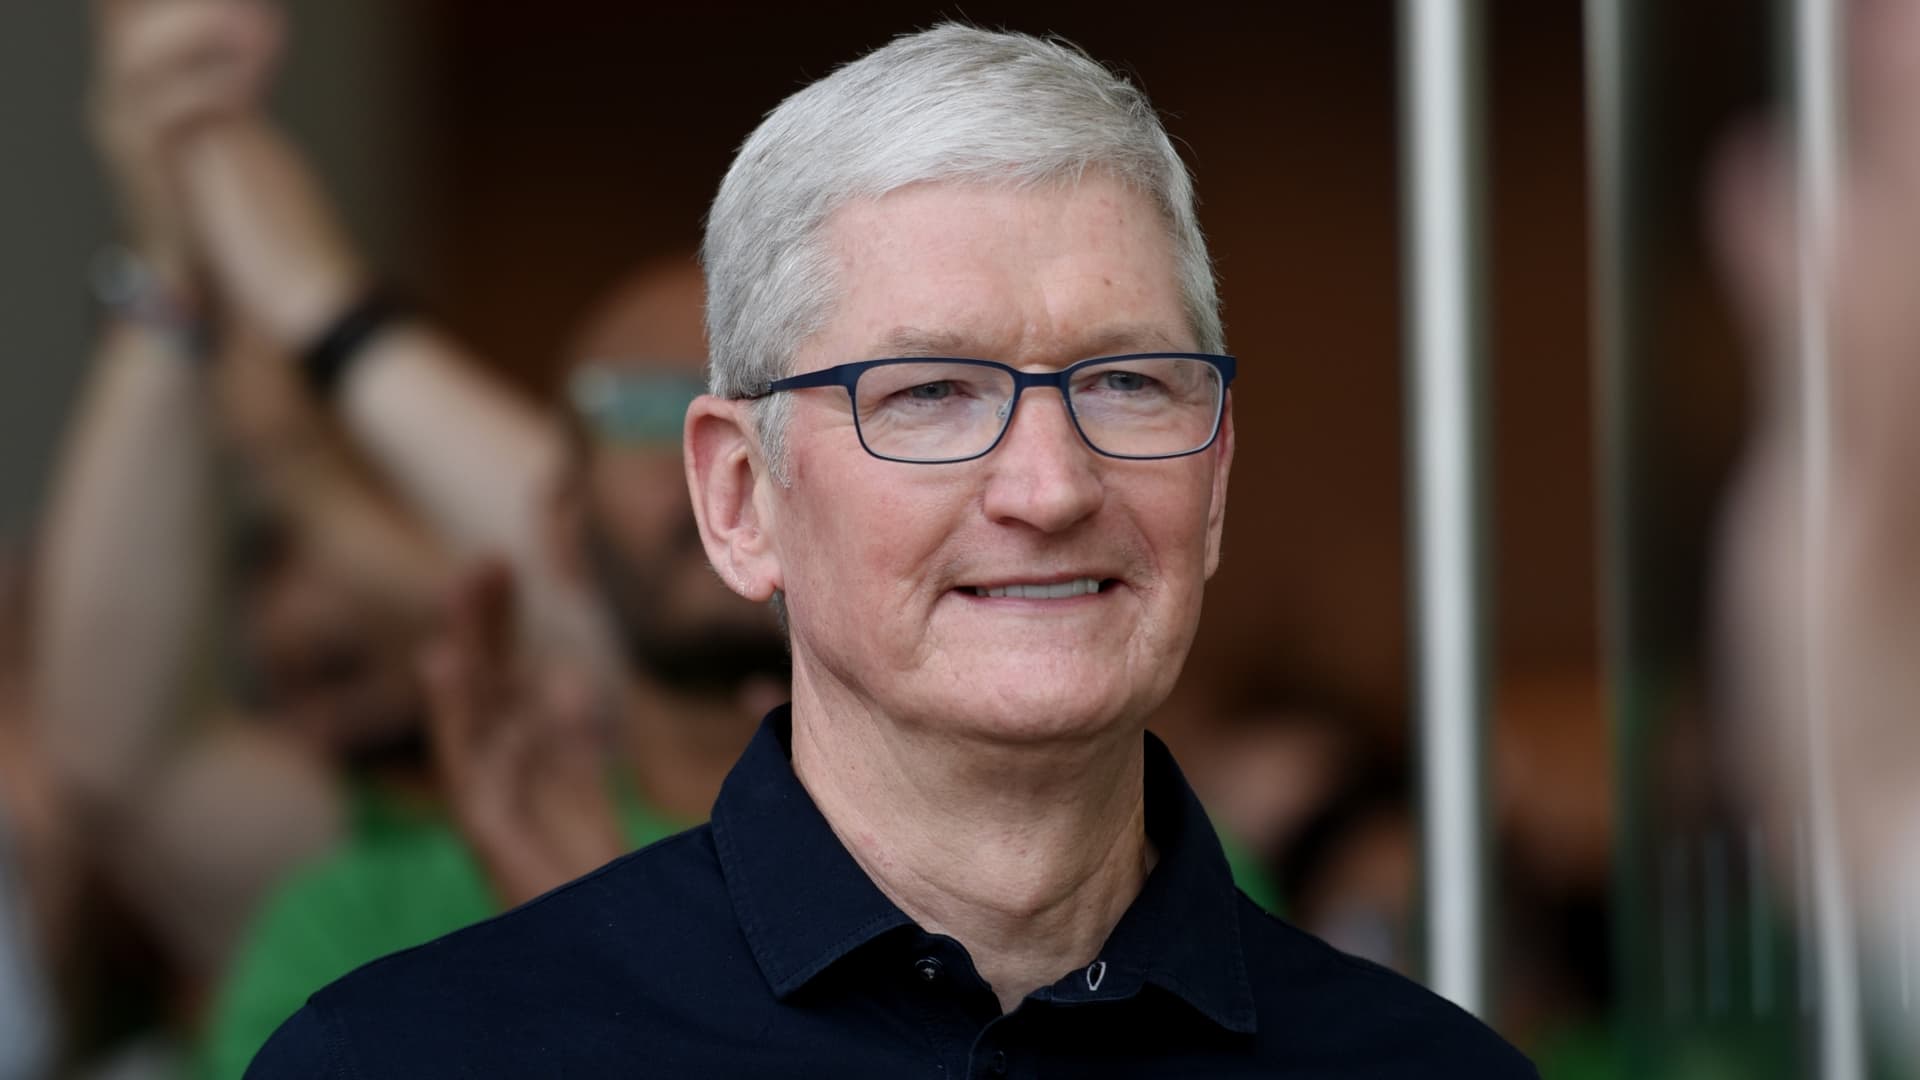 ceo-tim-cook-says-layoffs-are-a-‘last-resort’-and-not-something-apple-is-considering-right-now